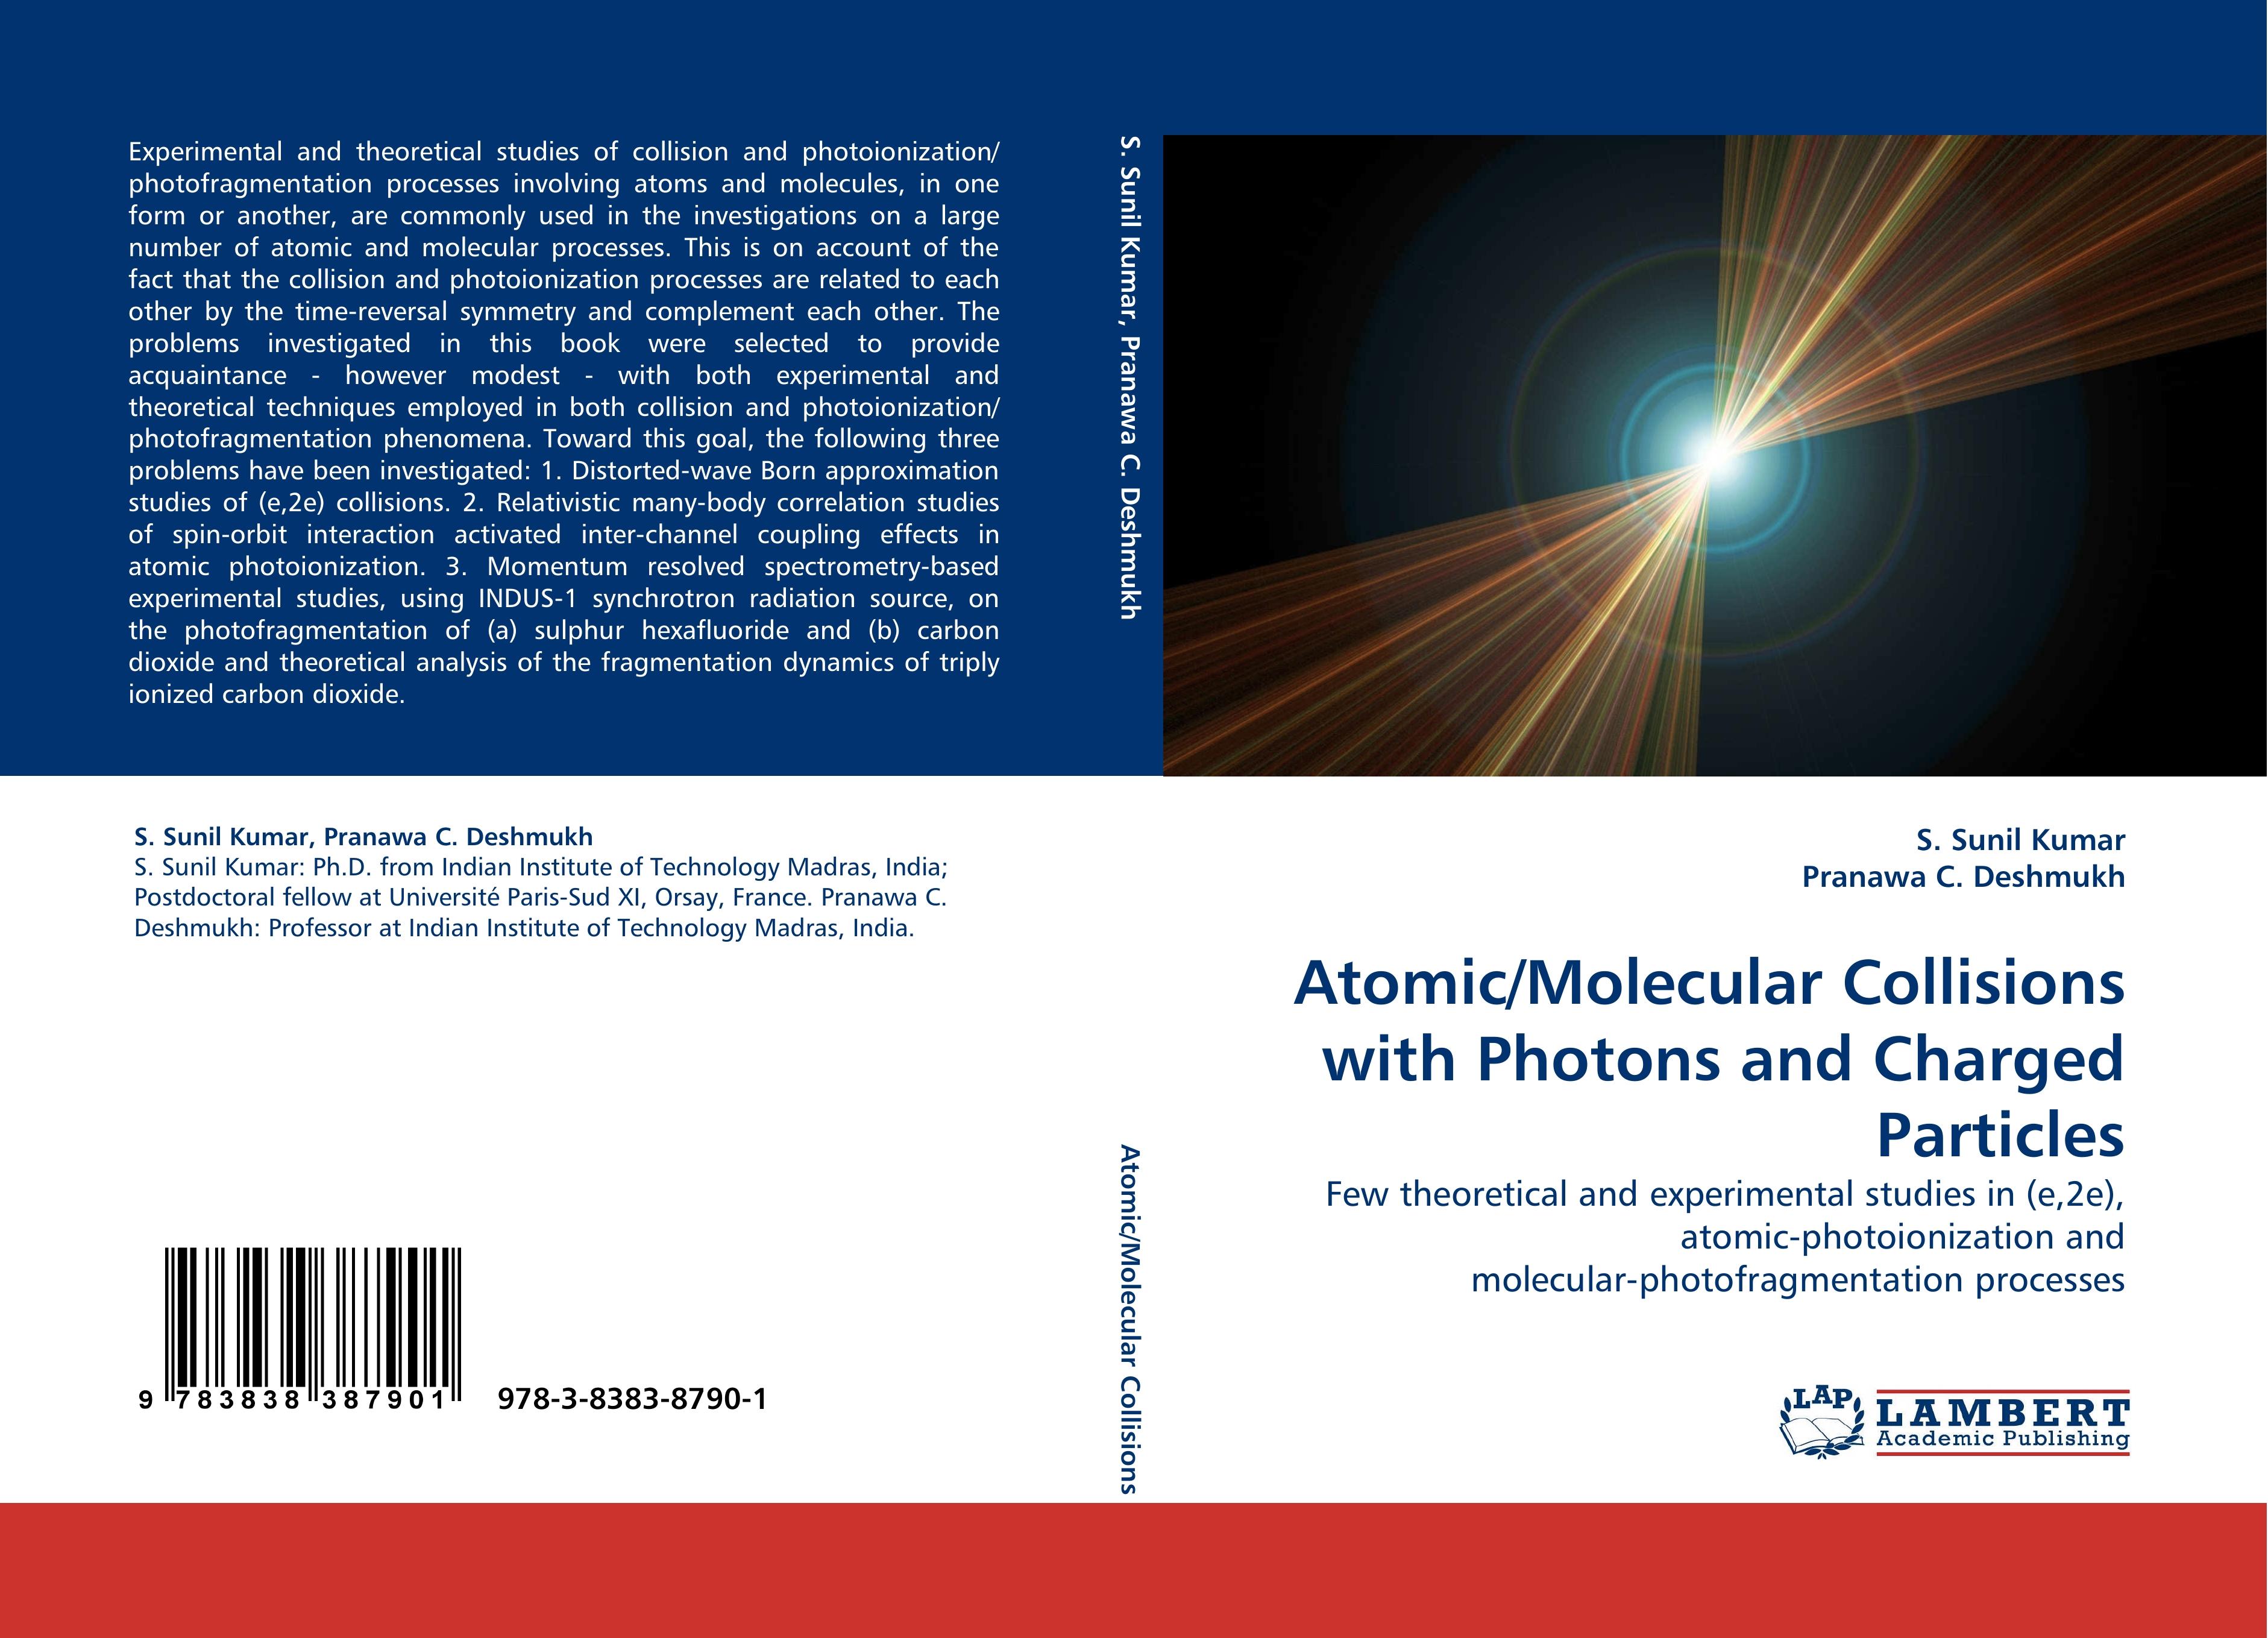 Atomic/Molecular Collisions with Photons and Charged Particles - Kumar, S. Sunil|Deshmukh, Pranawa C.